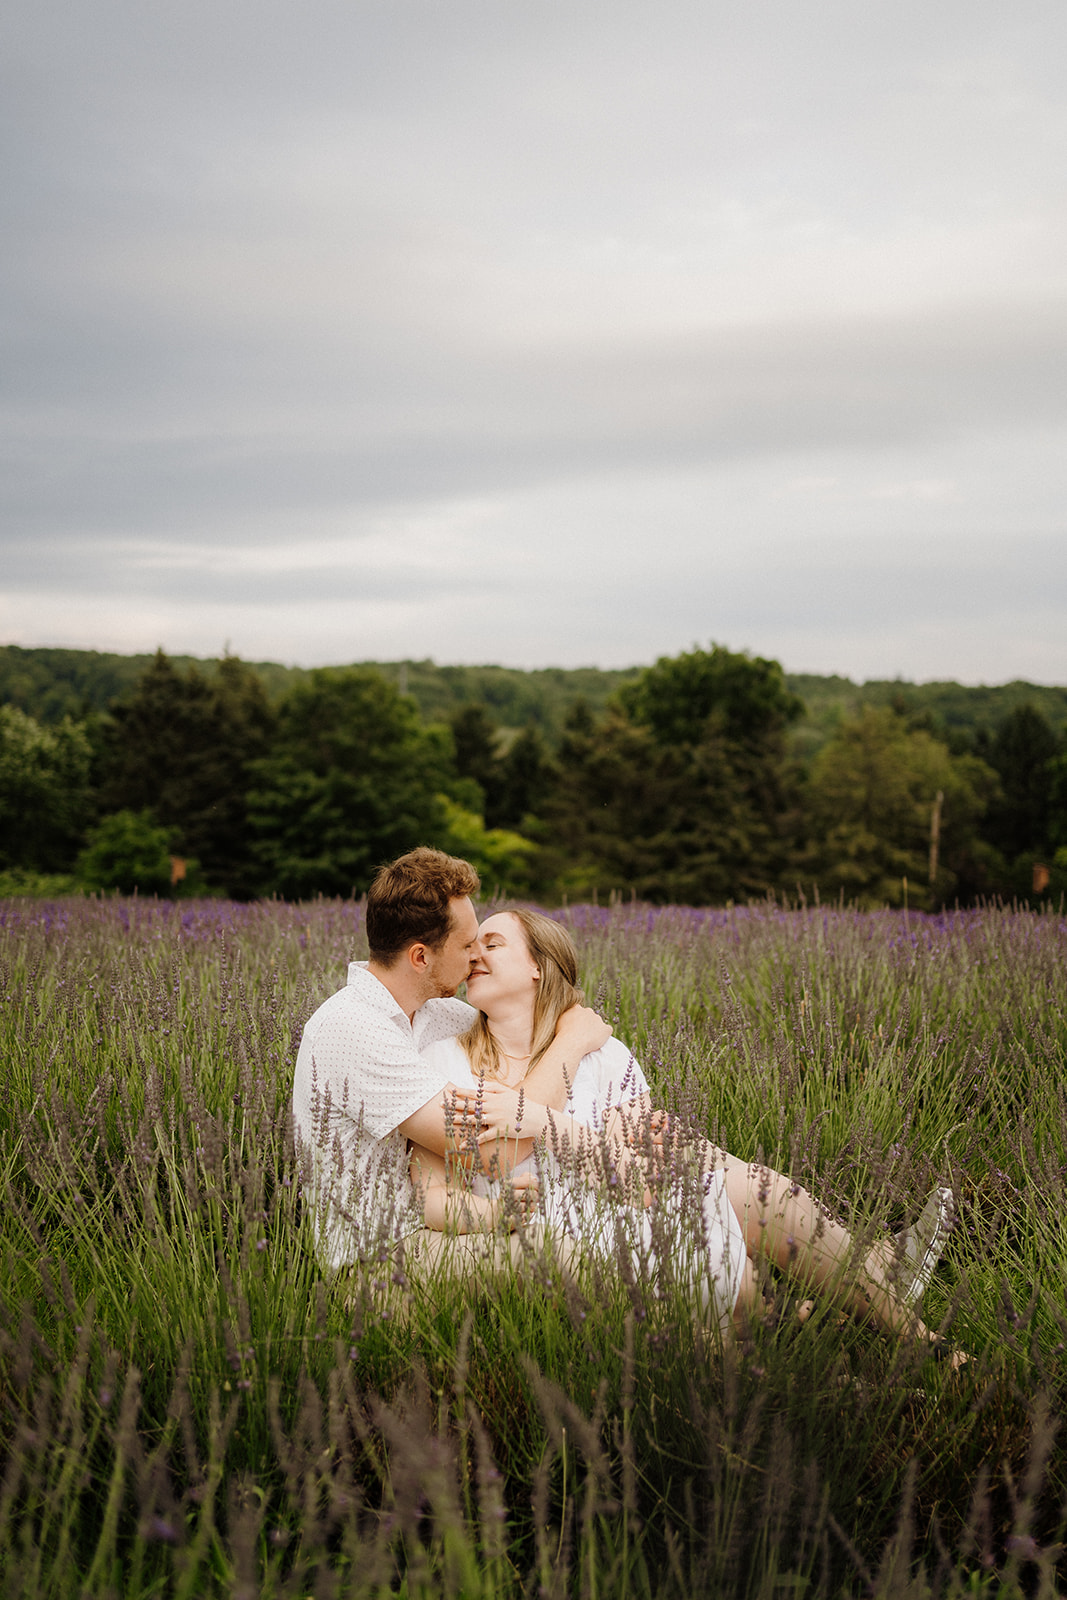 Man and woman touch noses while sitting in the grass.